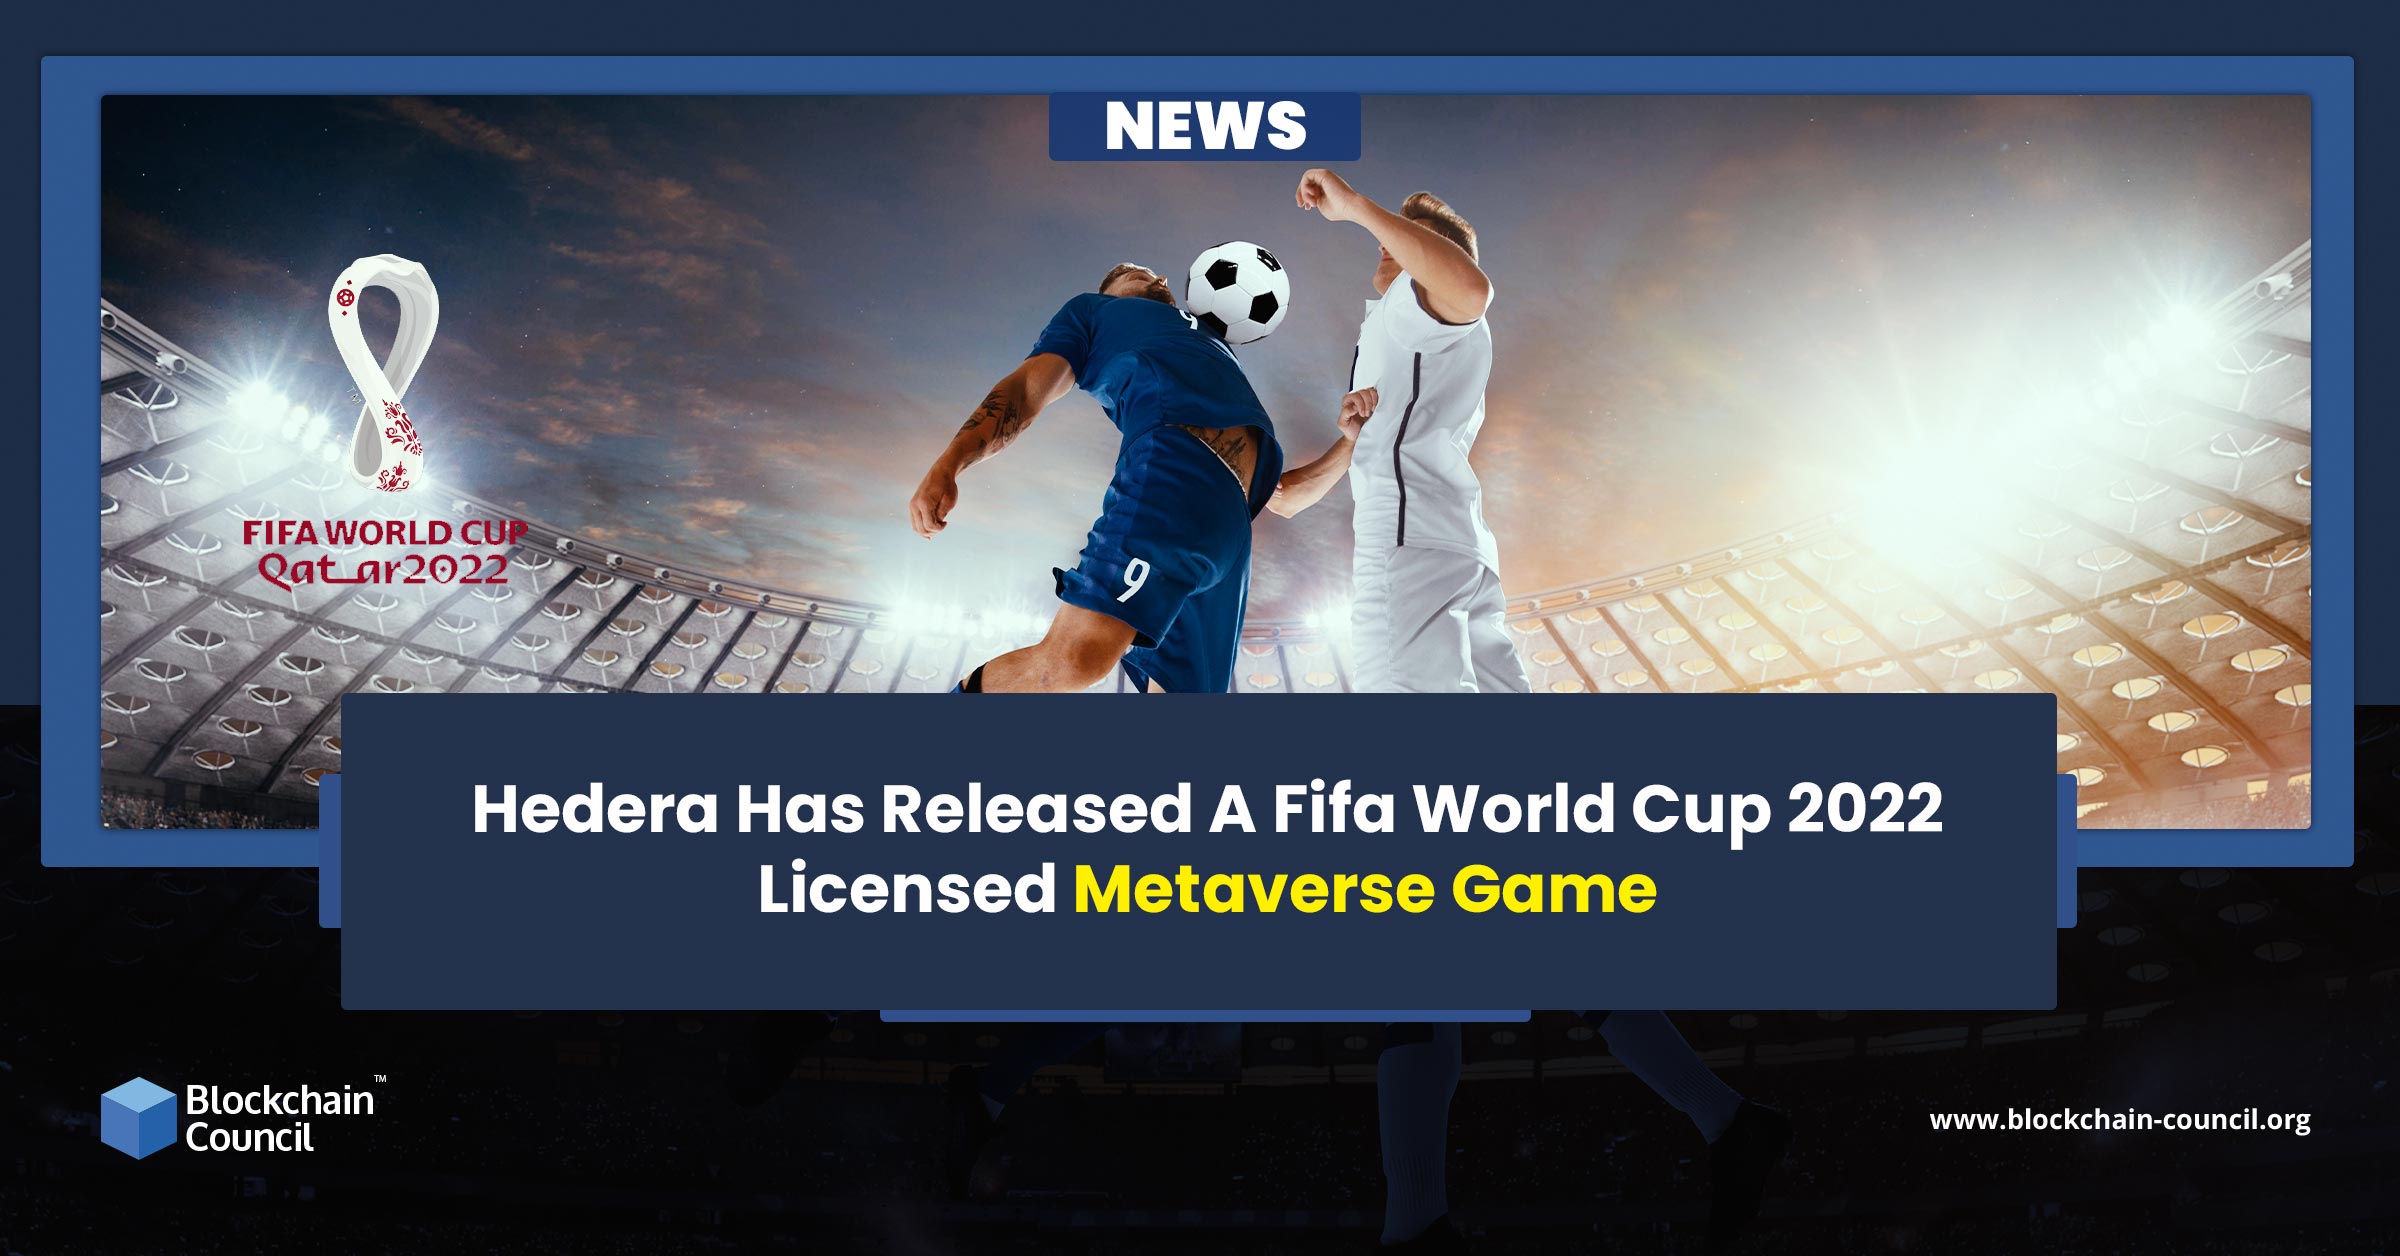 Hedera Has Released A Fifa World Cup 2022 Licensed Metaverse Game